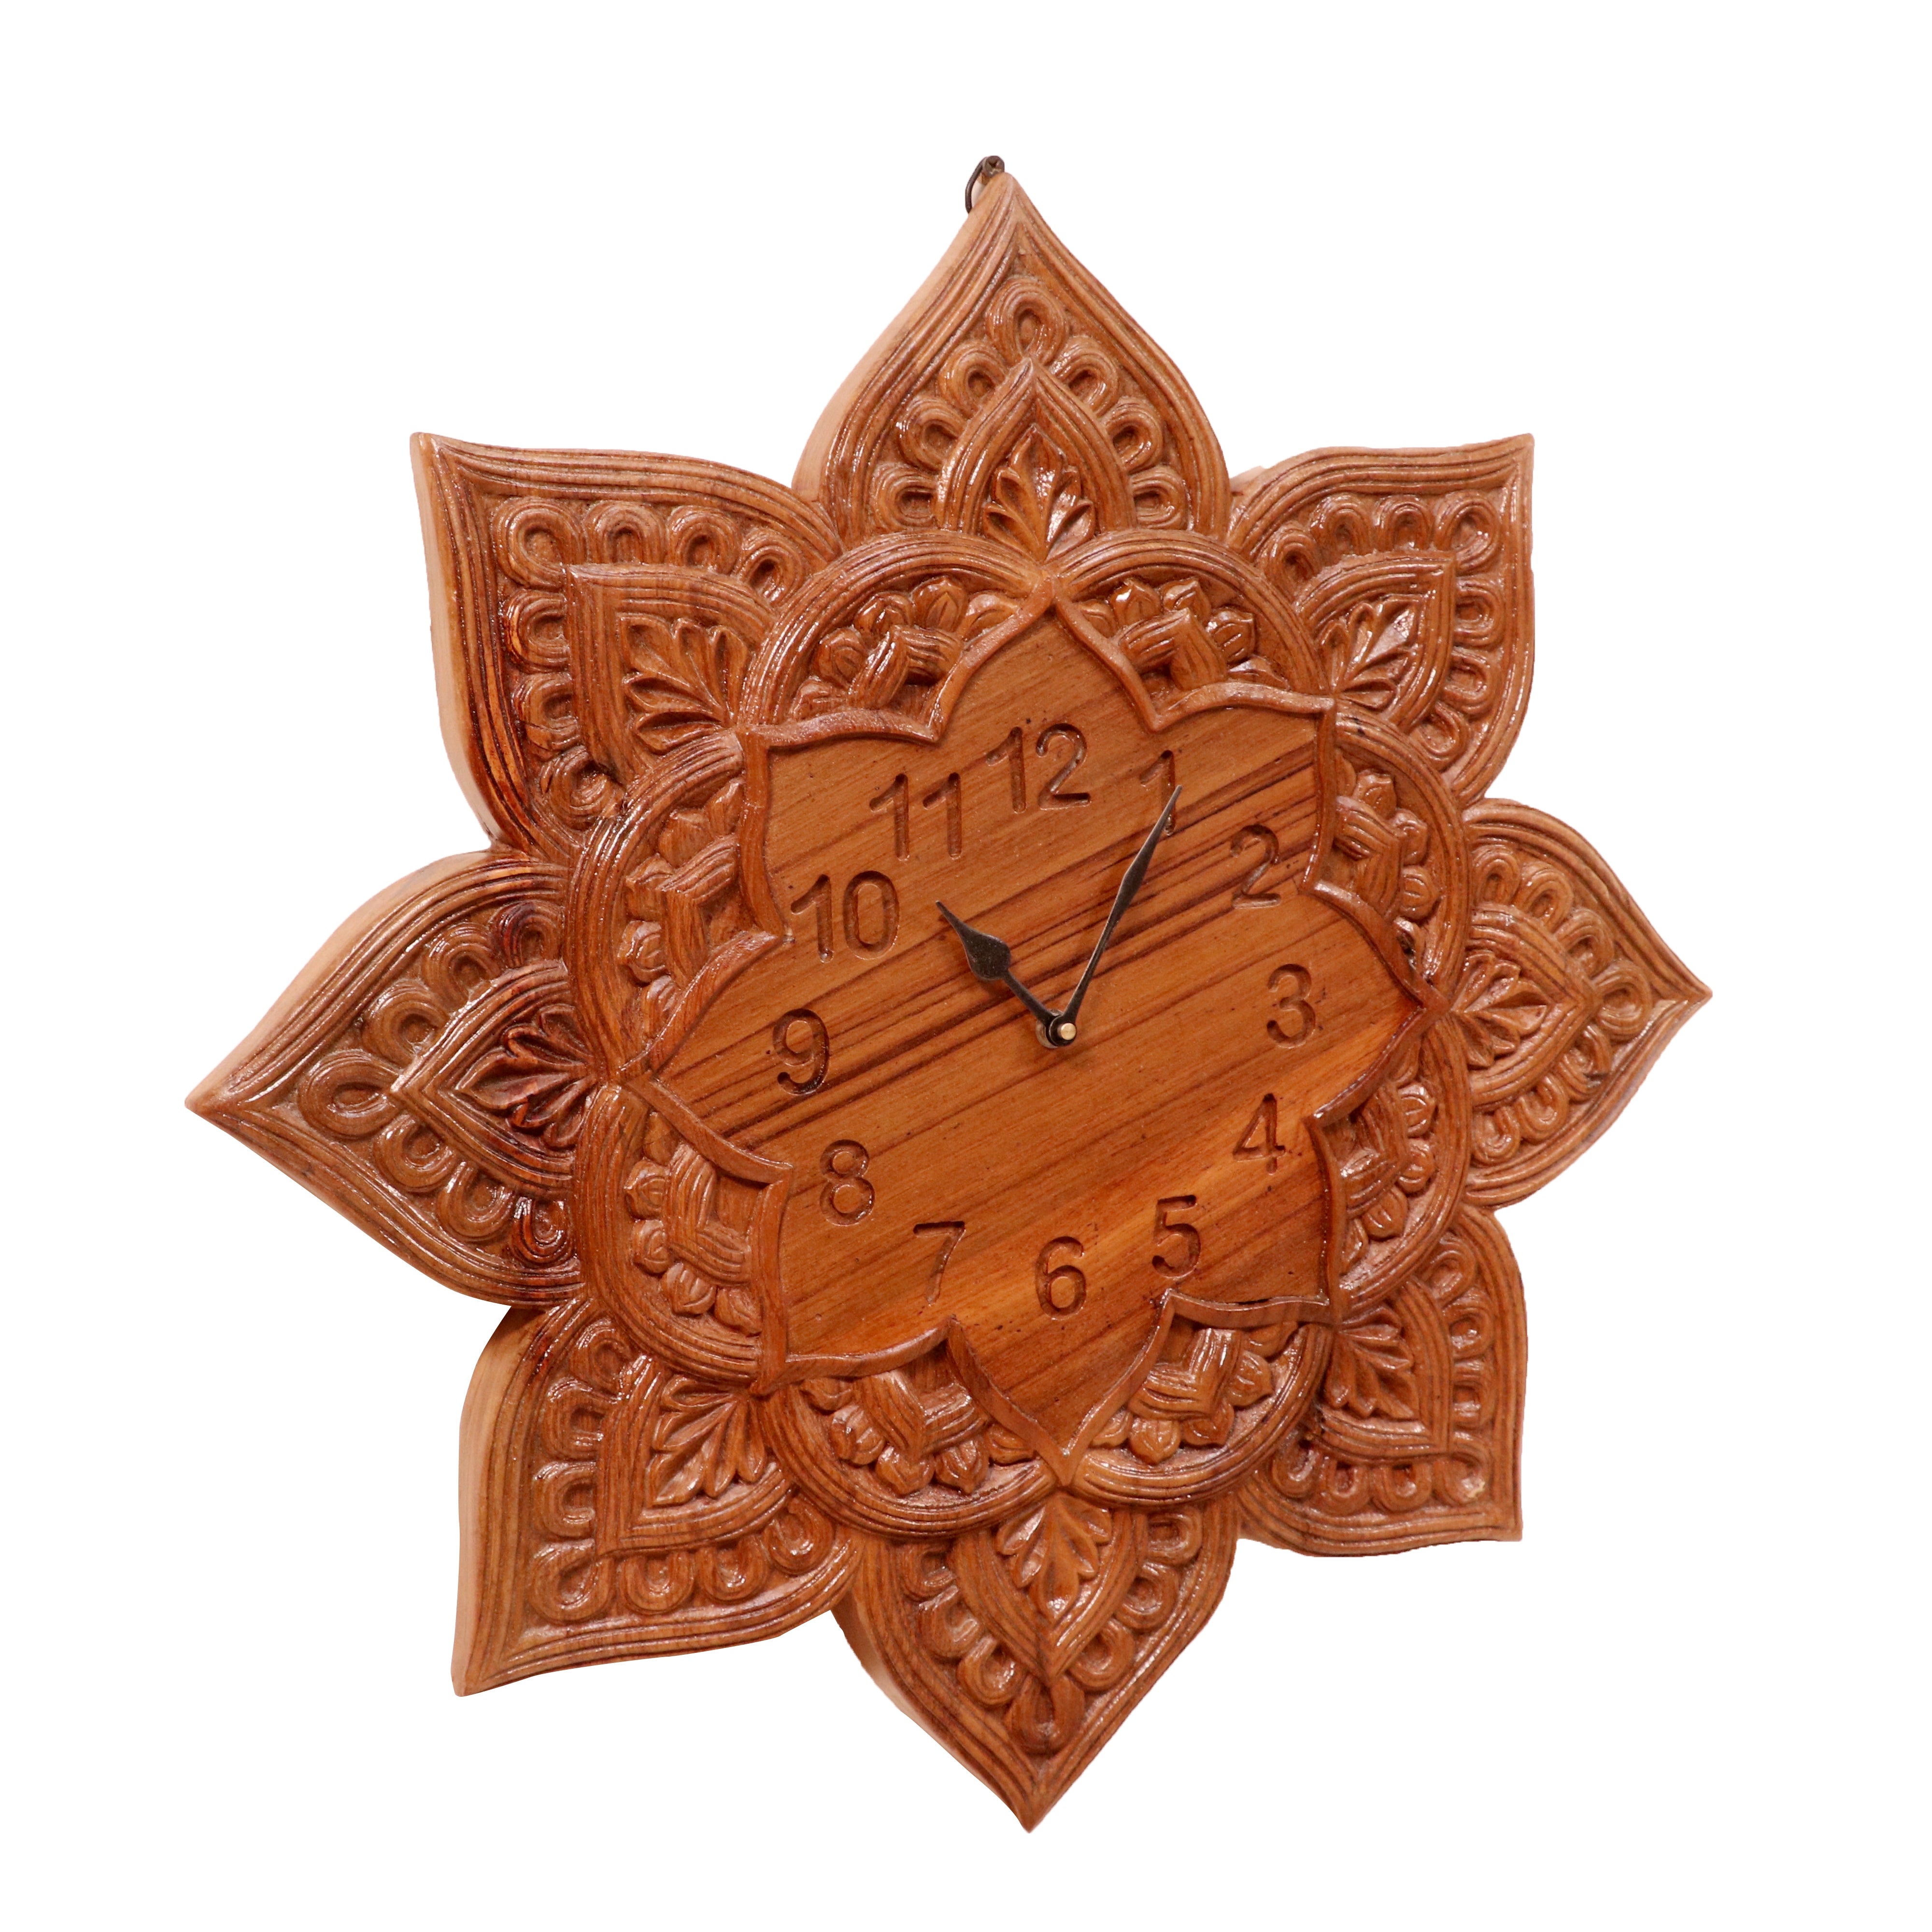 Ophitic Carved Flowered Style Handmade Wooden Wall Clock for Home Clock